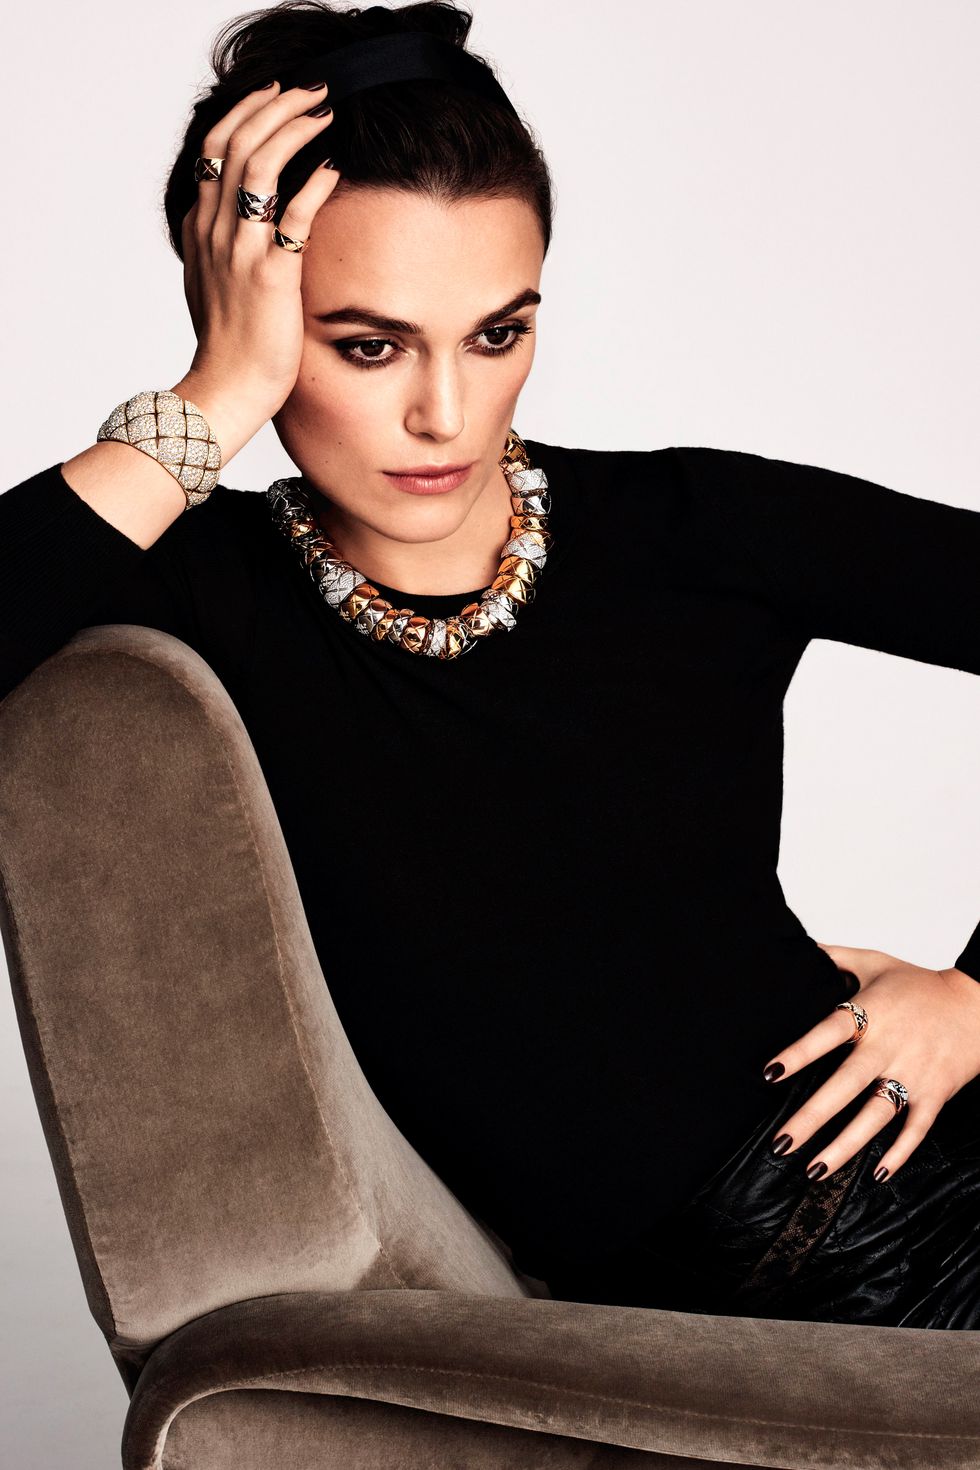 Keira Knightley lands another Chanel campaign